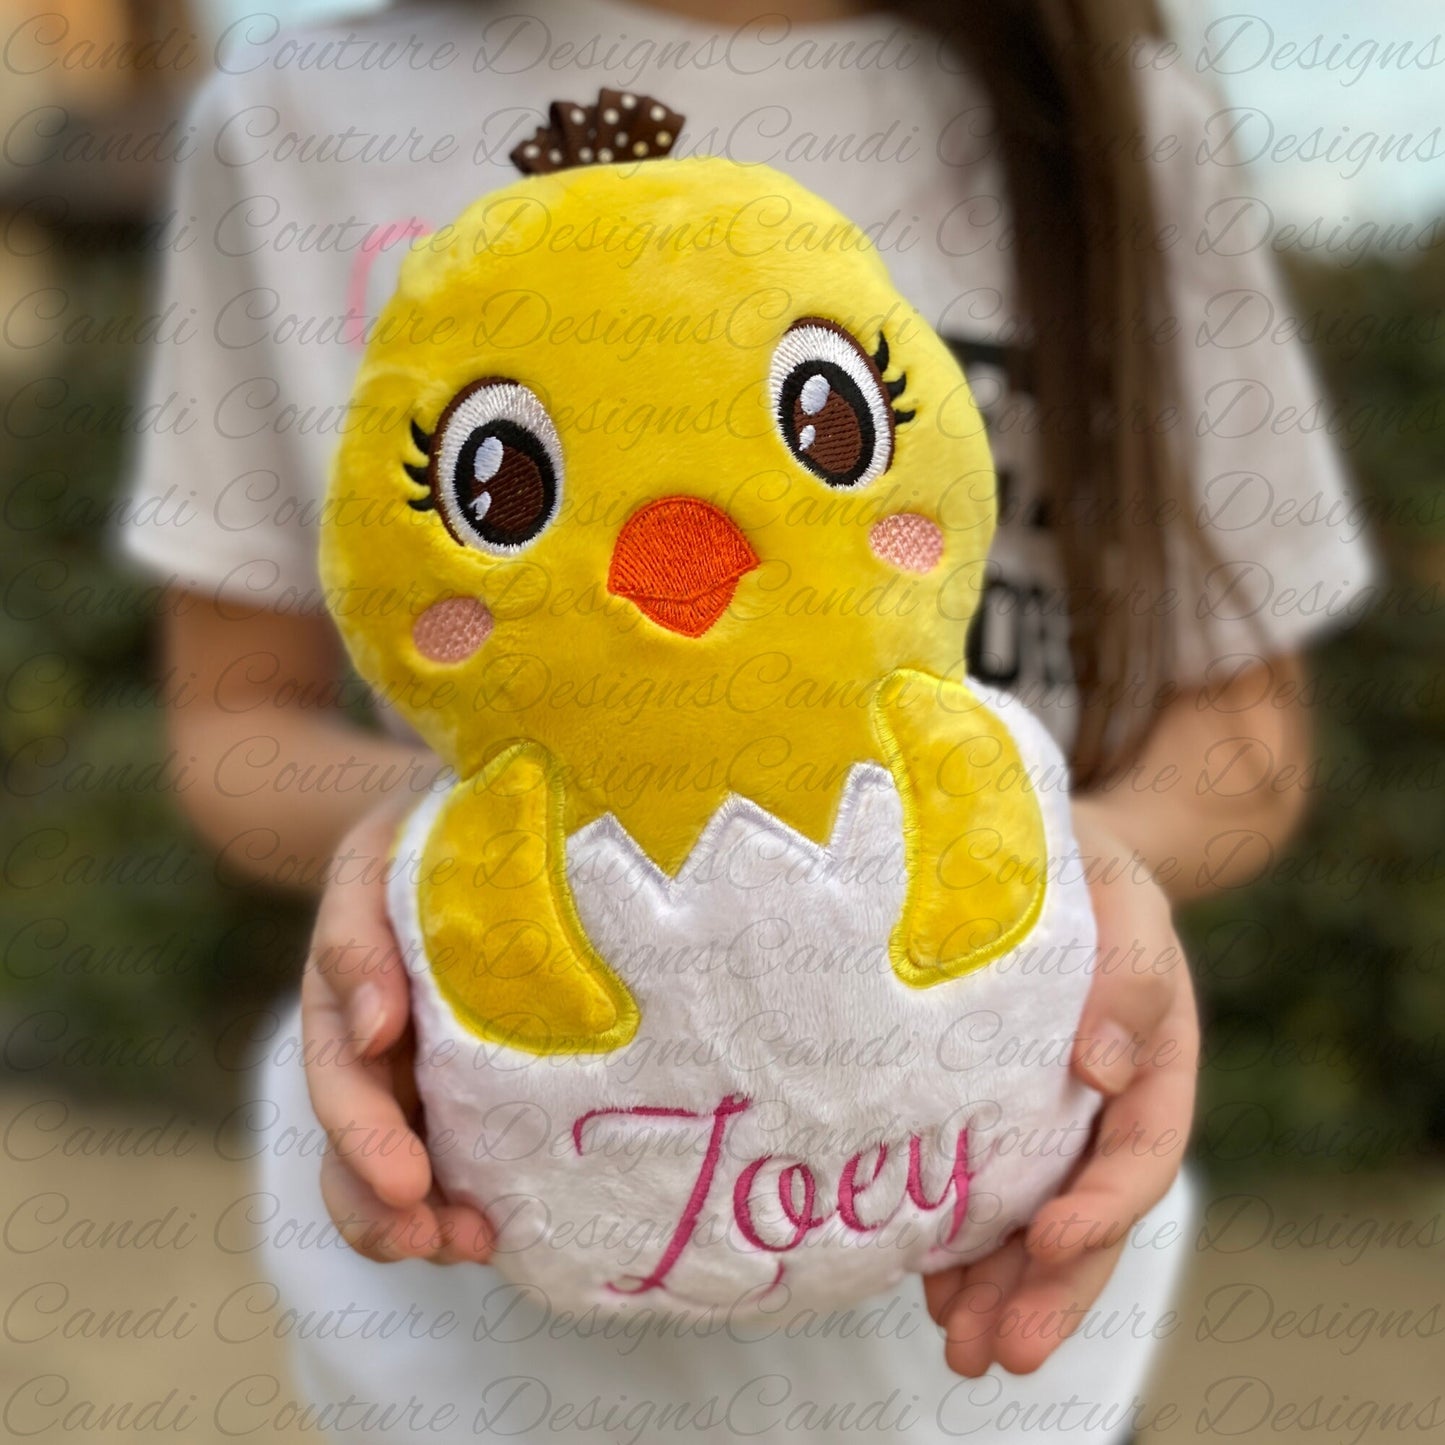 Personalized Chick in Egg, Easter Basket Gift, Fleece Chick Stuffie in Egg, Monogrammed Stuffed Toy, Stuffed Easter Chicken, Easter Plush